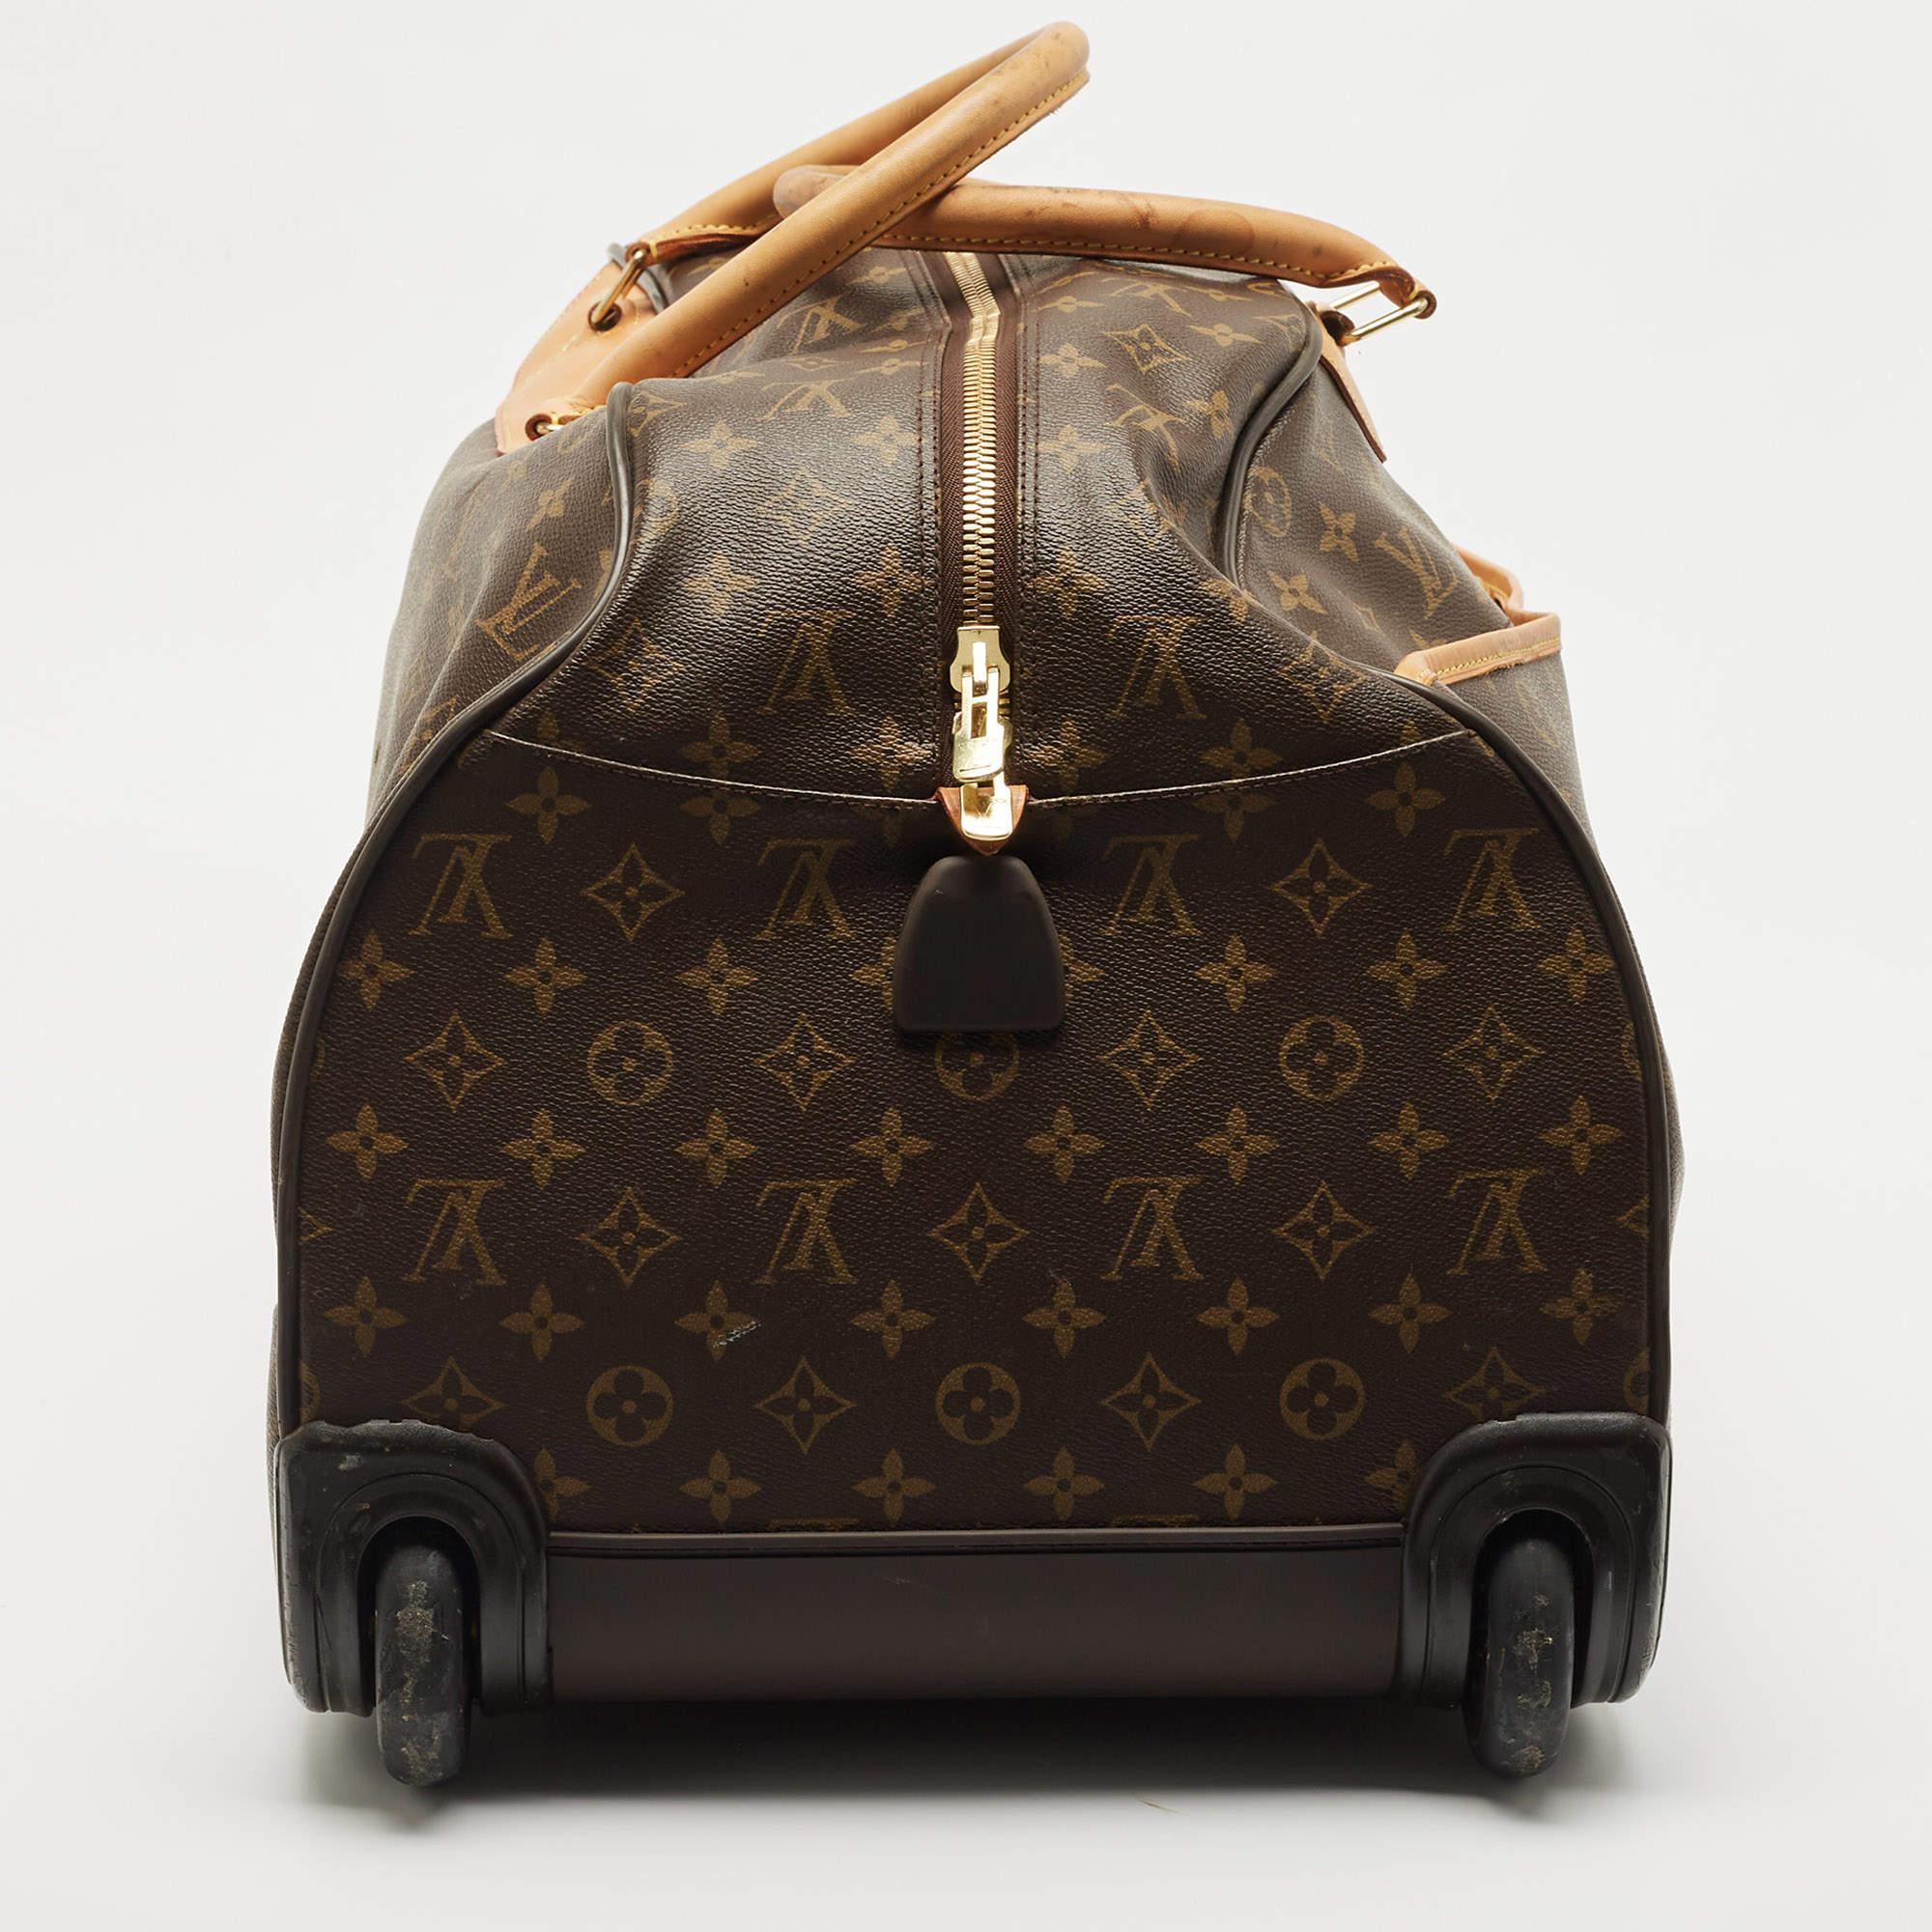 Travel to all the places you wish to, with ease, using this LV luggage case. It is a result of employing high-grade materials and meticulous construction to deliver impeccable products that aim at functional ease.

